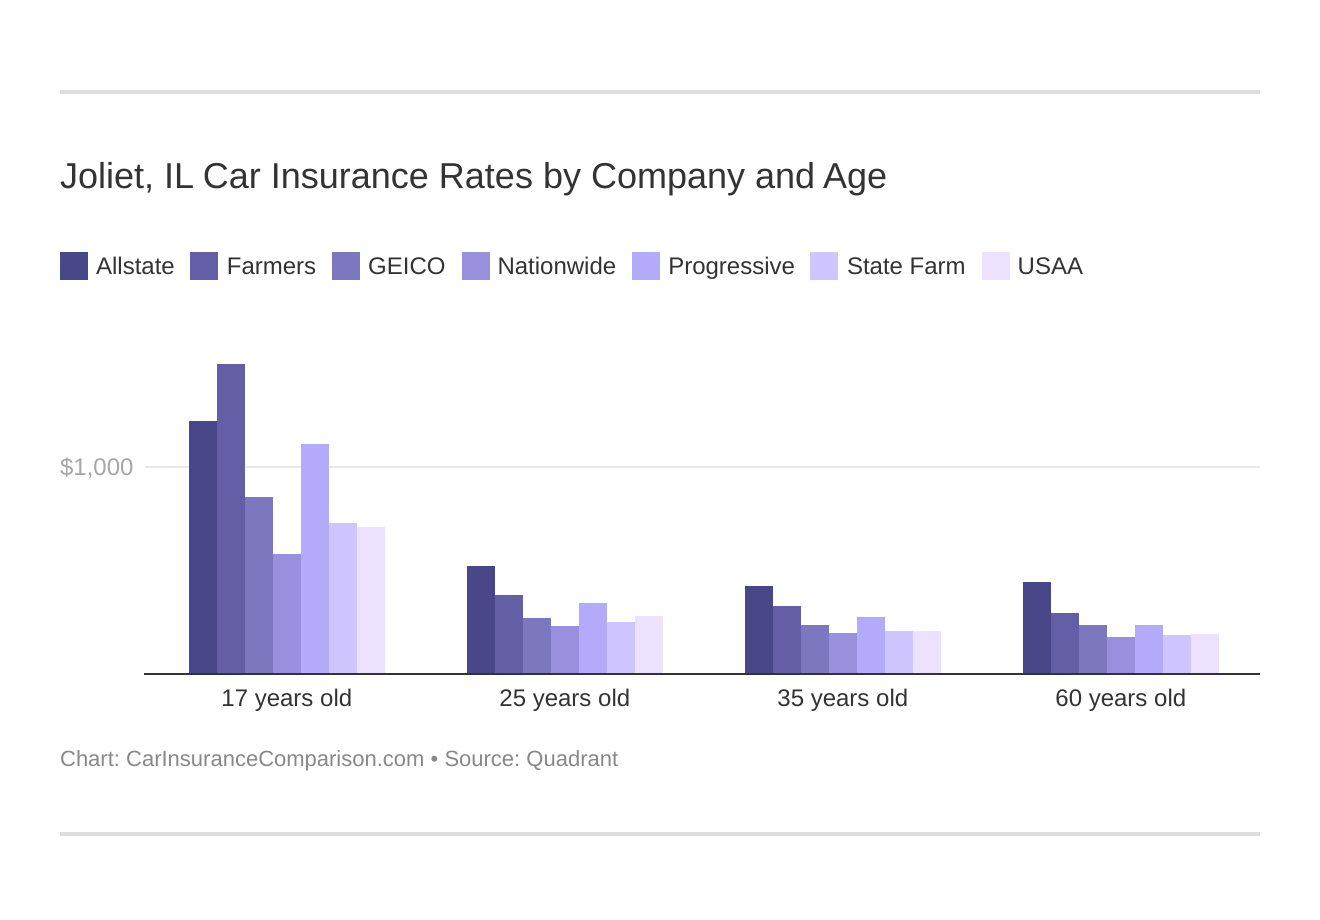 Joliet, IL Car Insurance Rates by Company and Age